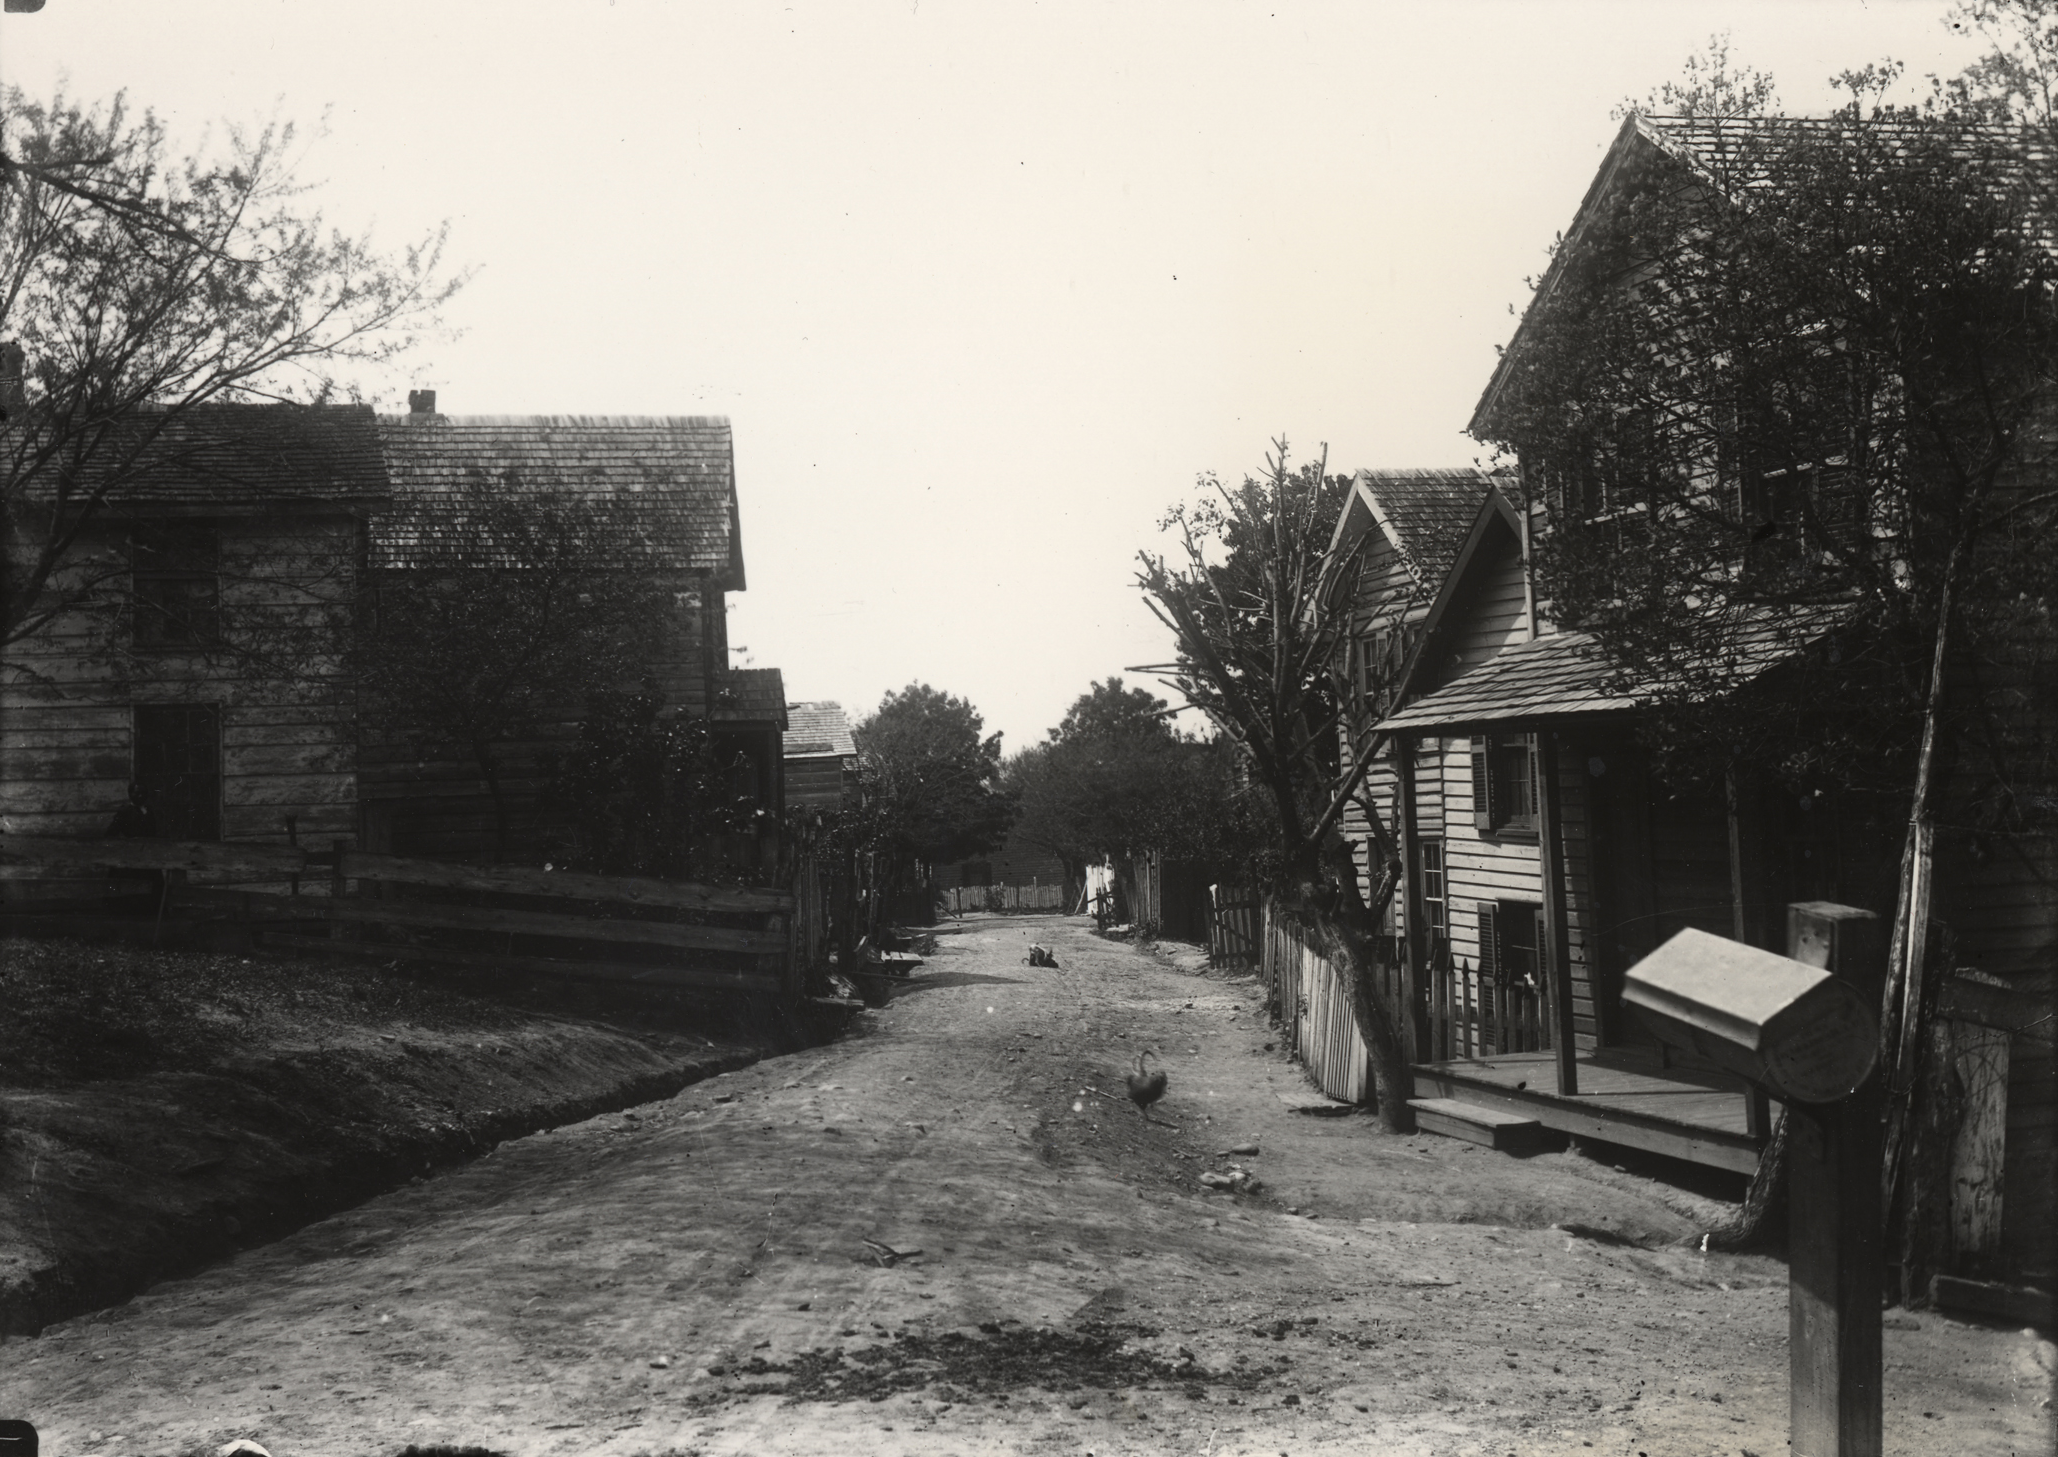 An unpaved street in Queen City. Source: Center for Local History, Arlington Public Library.